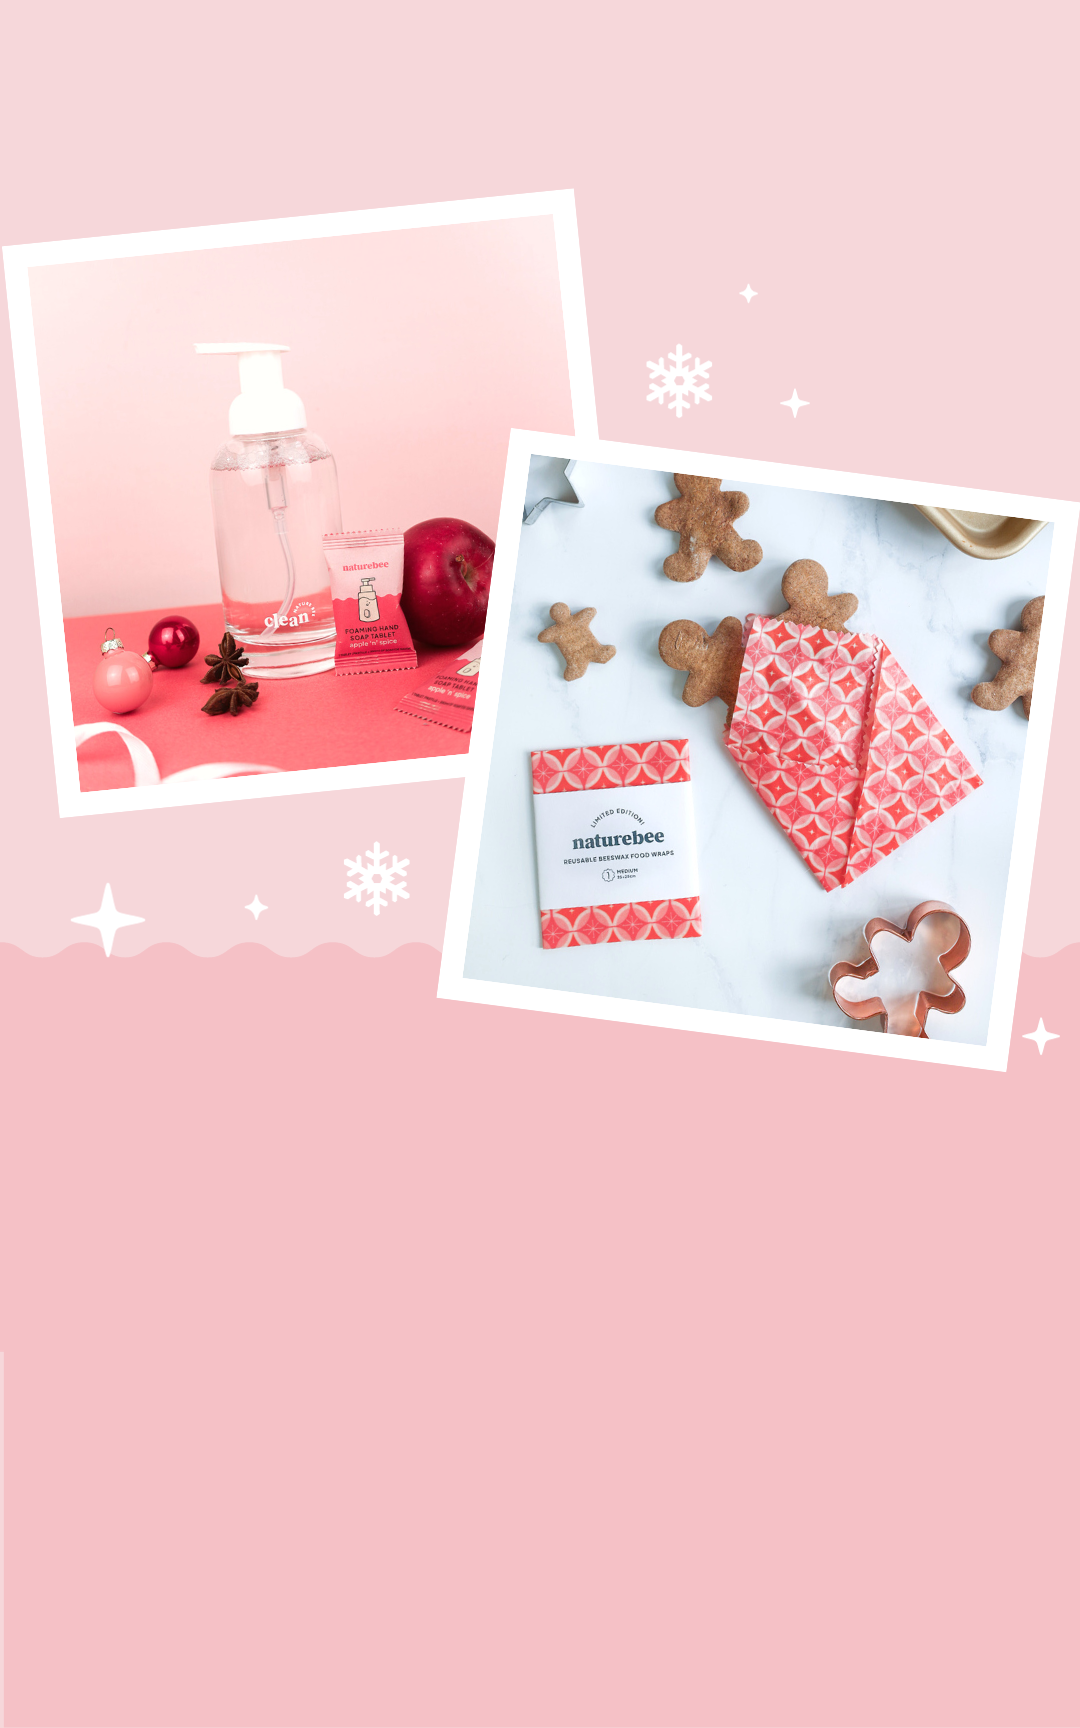 pink Christmas background with squiggly design. There are two polaroid images on the background surrounded by white snowflakes and sparkles. One image shows holiday scented foaming hand soap tablets that dissolve in water to make hand soap, along with a glass soap dispenser. the items are surrounded by Christmas bobbles and ribbon. The other image shows a holiday pattern beeswax food wrap wrapping up ginger bread cookies.